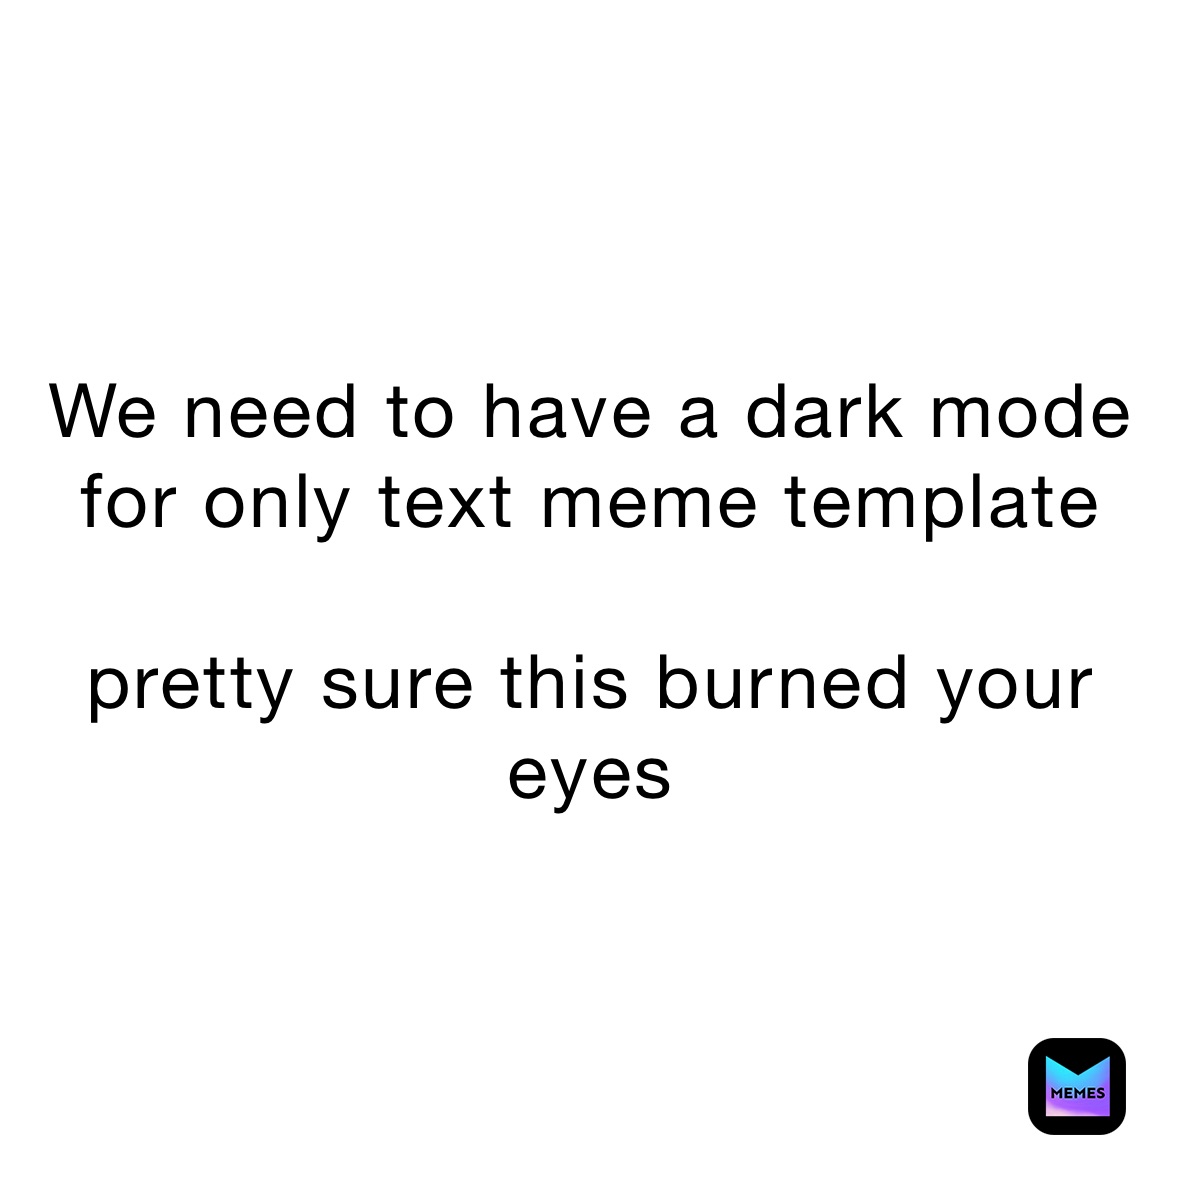 We need to have a dark mode for only text meme template

pretty sure this burned your eyes 